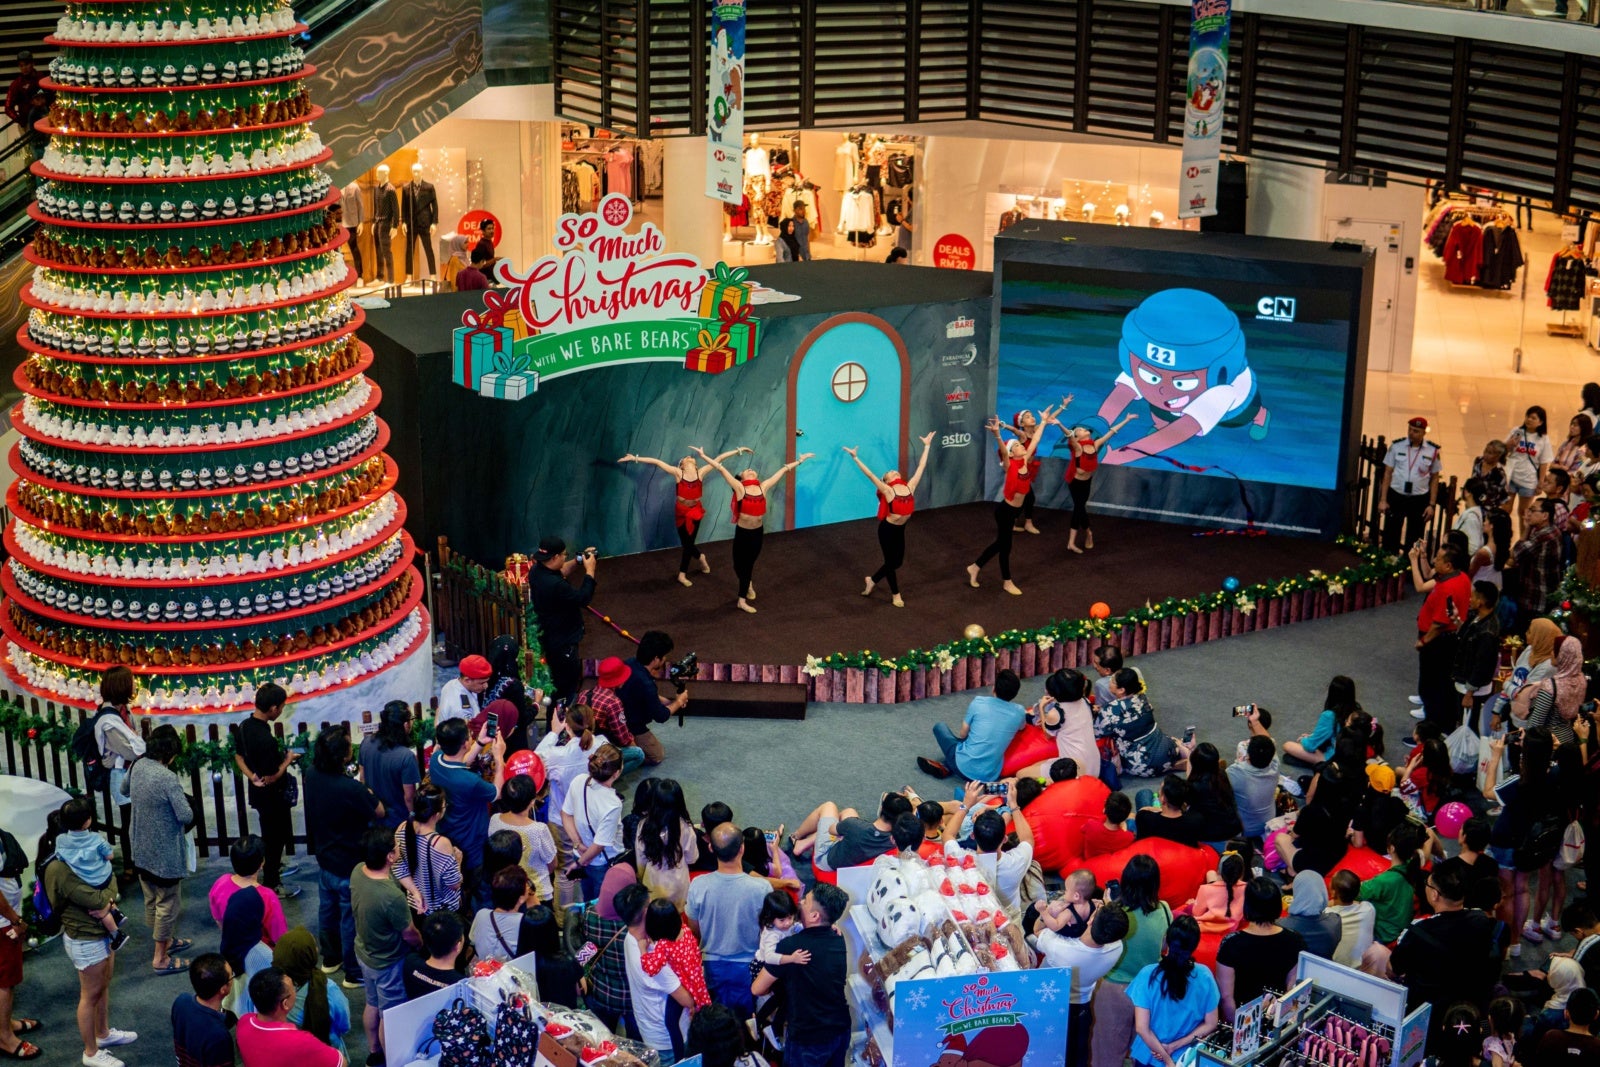 [TEST] A 'We Bare Bears' Themed Christmas in Malaysia That's Breaking a Nationwide Record?! Here's What We Know! - WORLD OF BUZZ 5